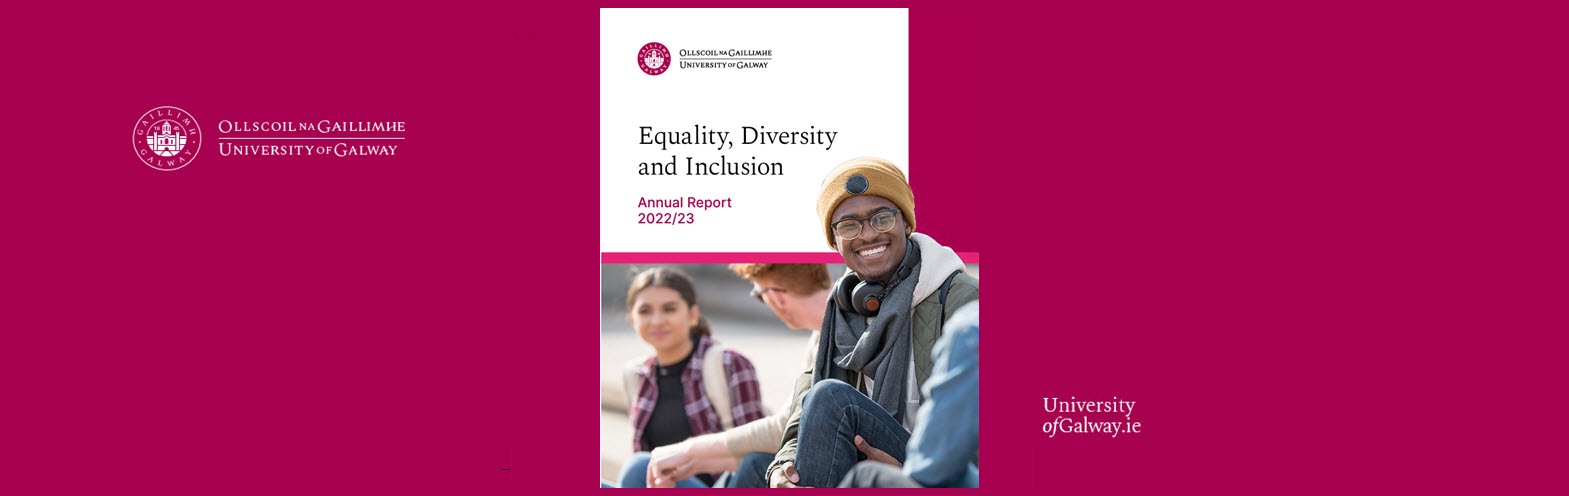 Equality, Diversity and Inclusion Annual Report